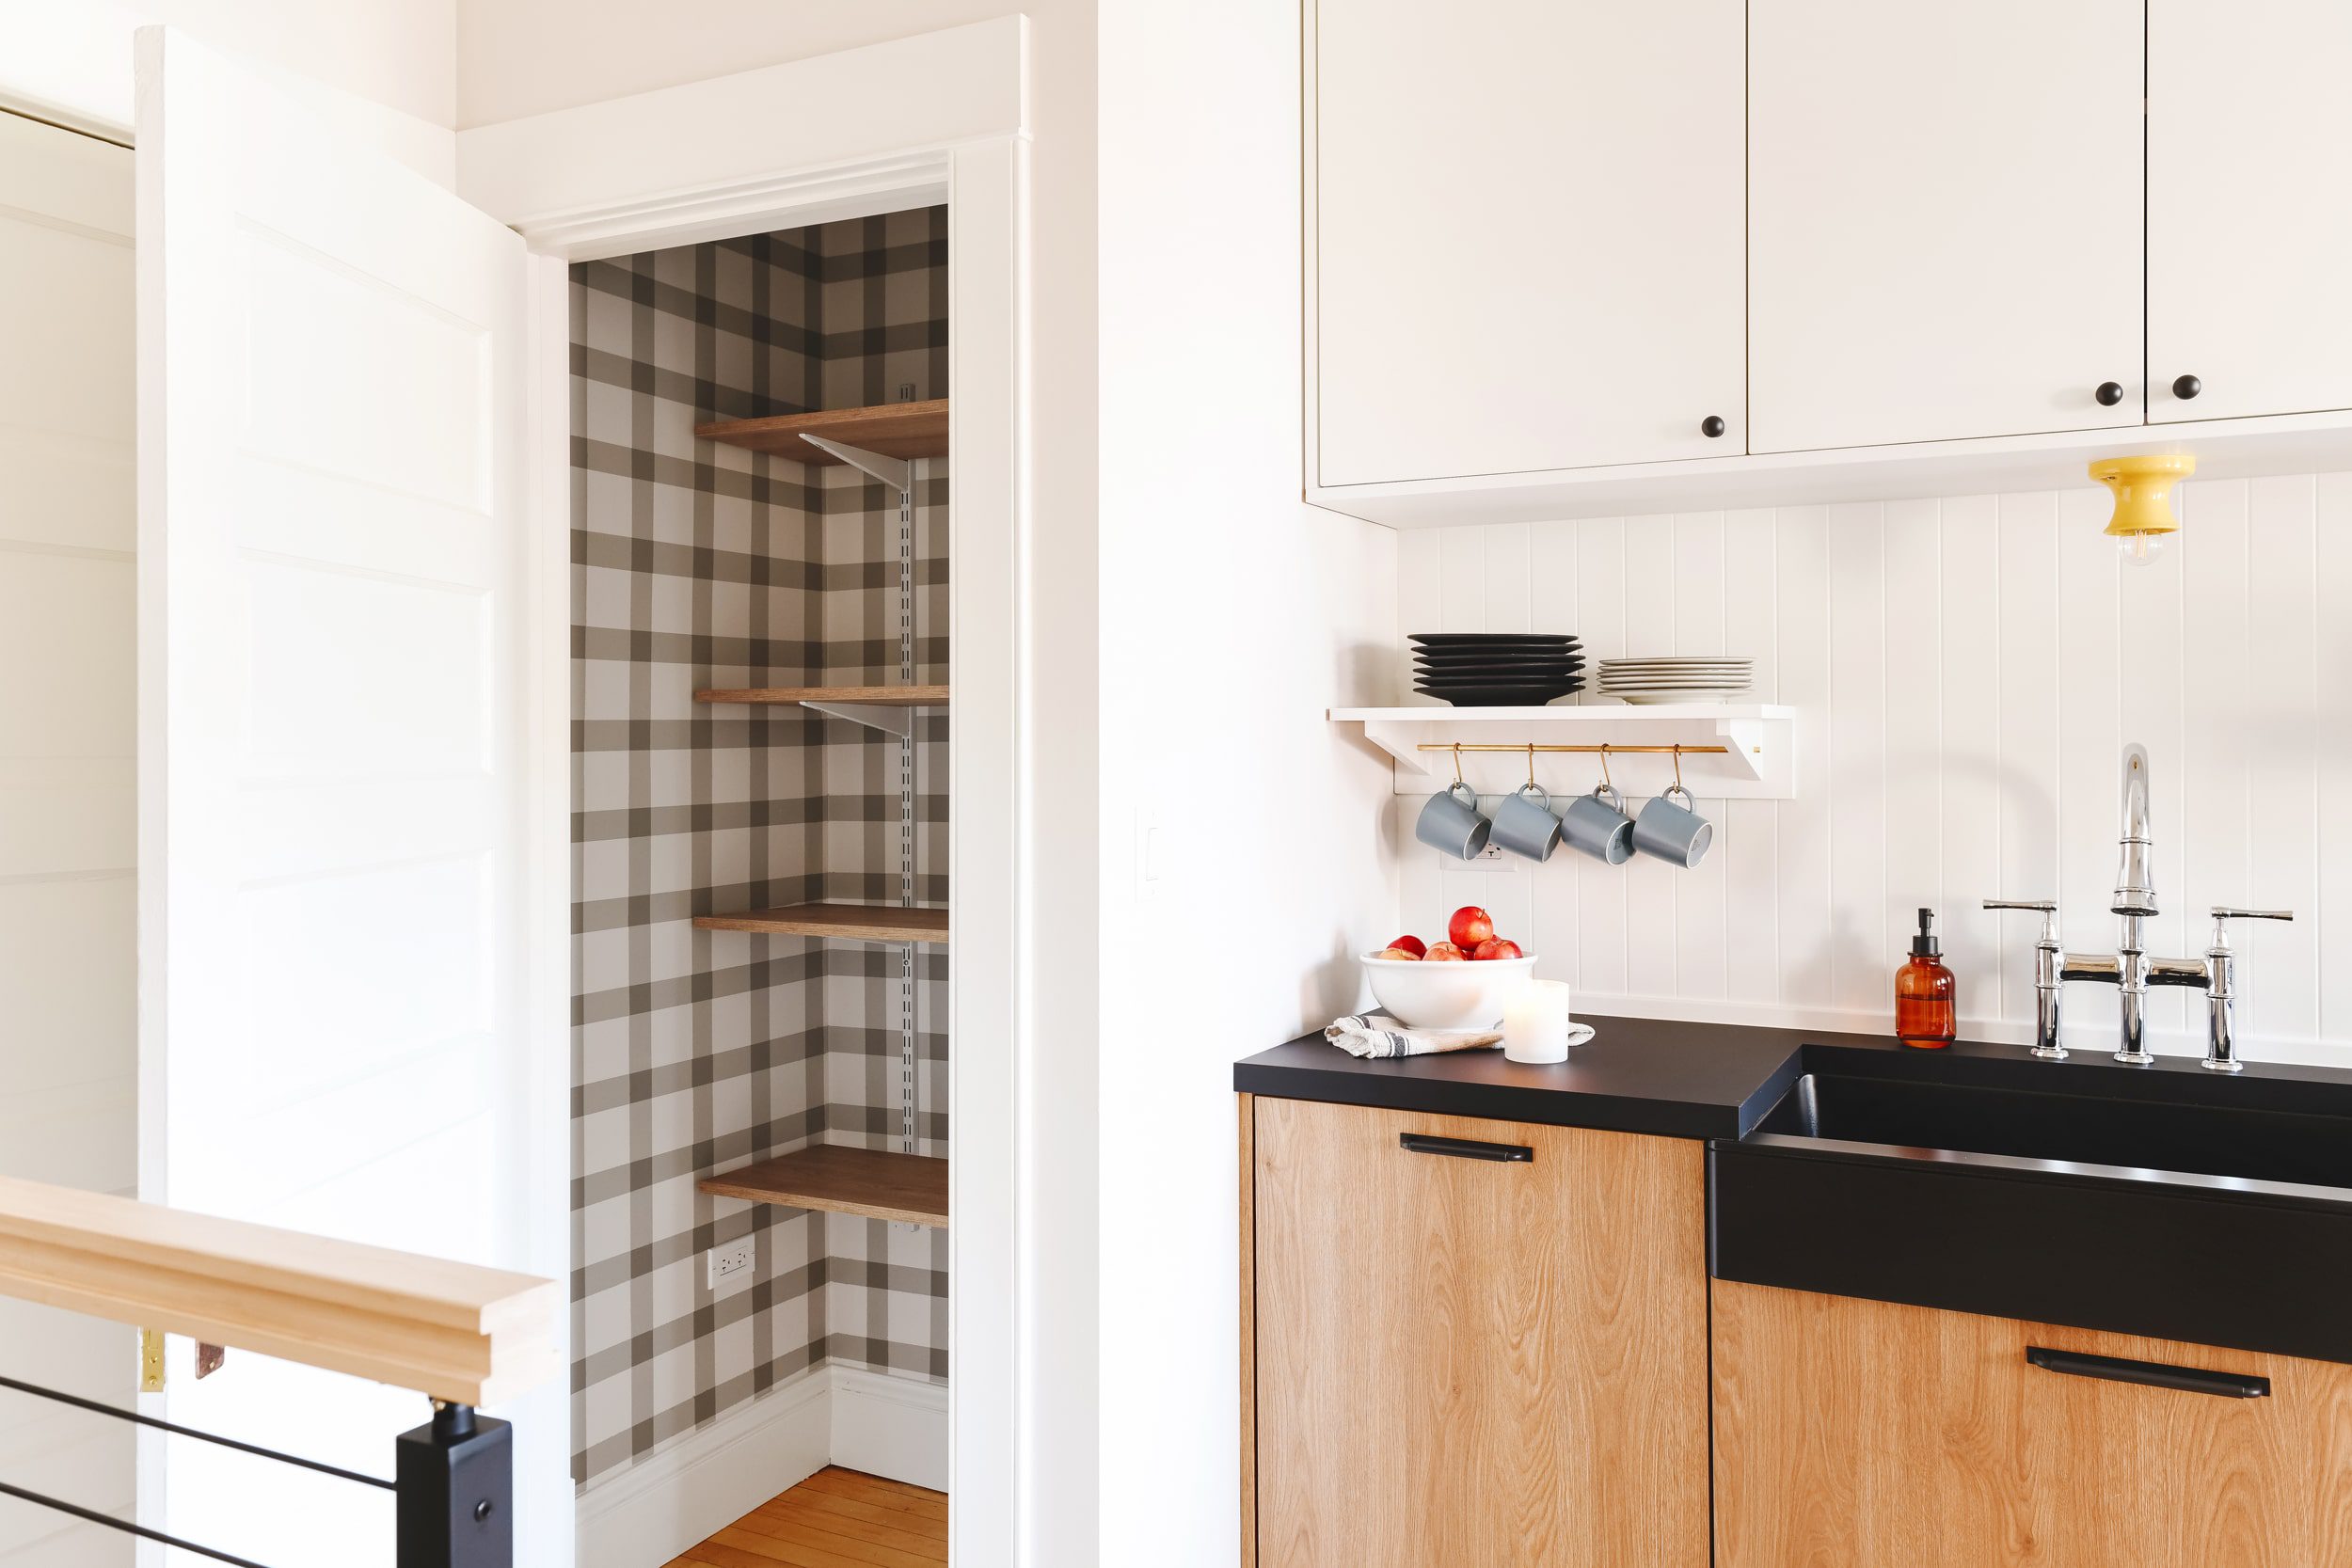 Our Unit 1 two flat kitchen featuring our DIY painted plaid pantry. 